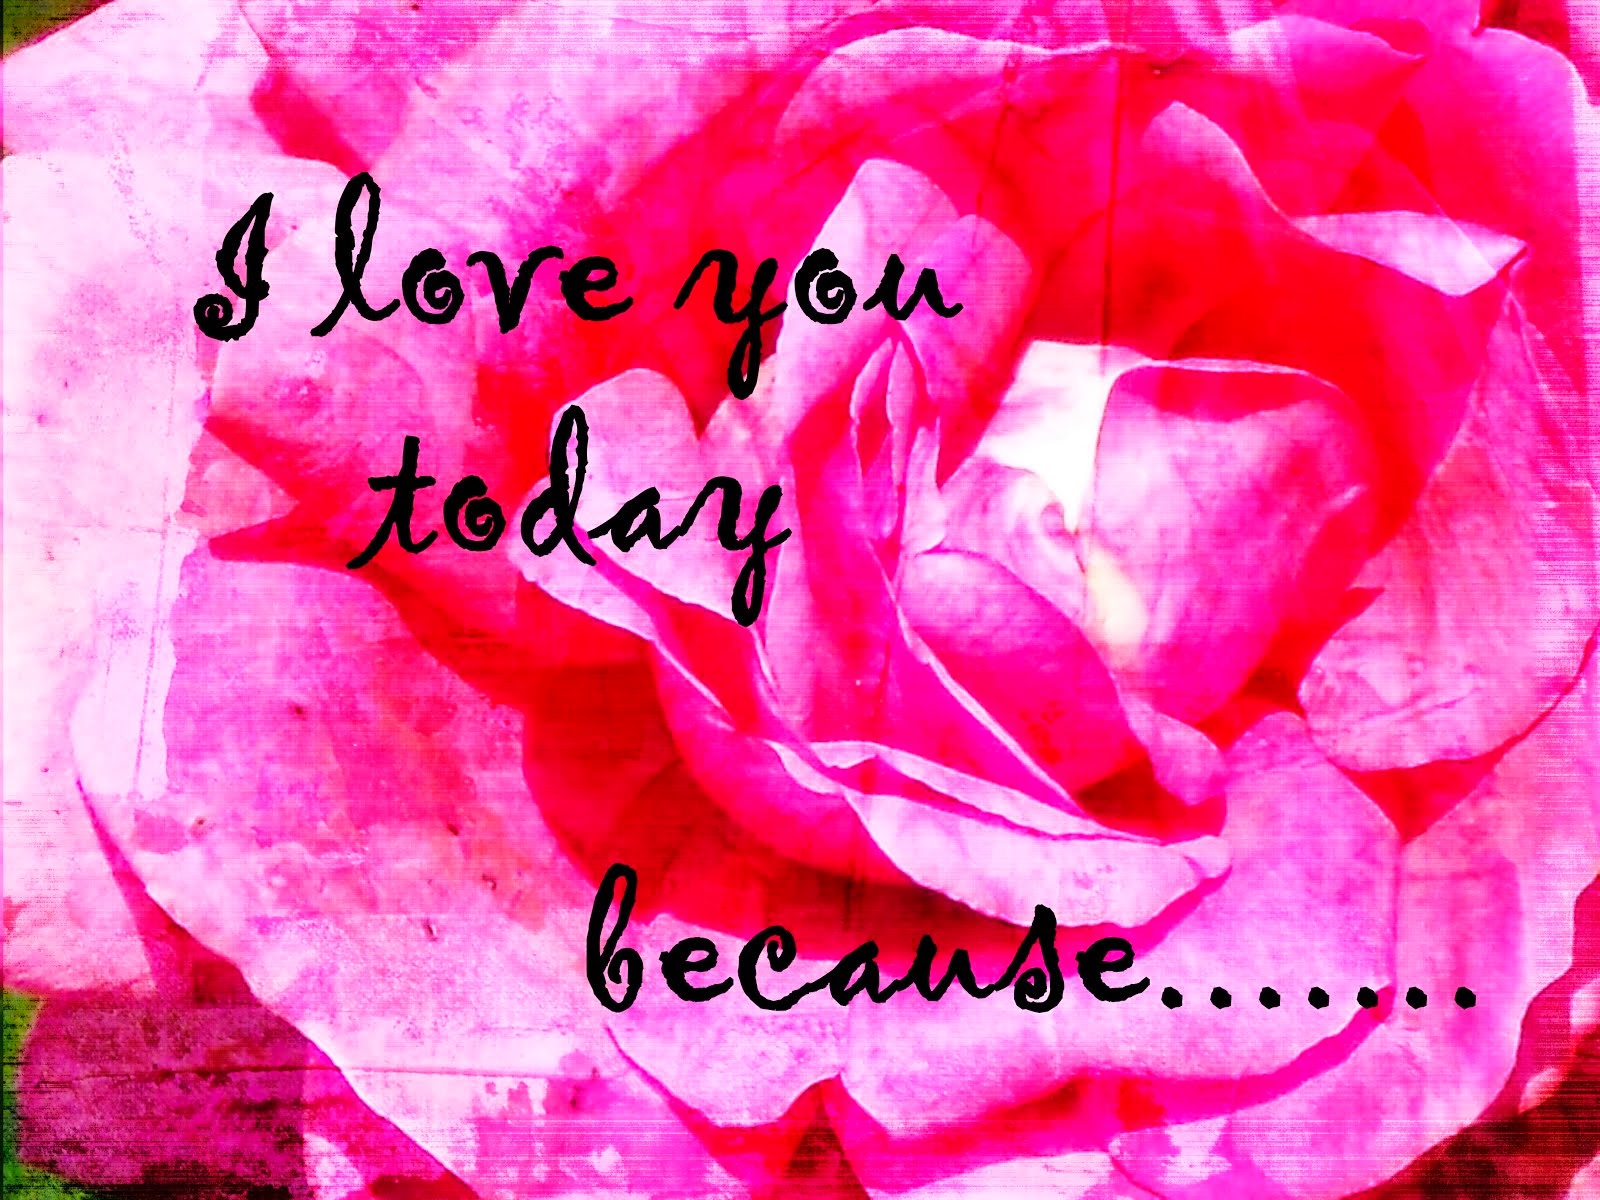 I love you today ....